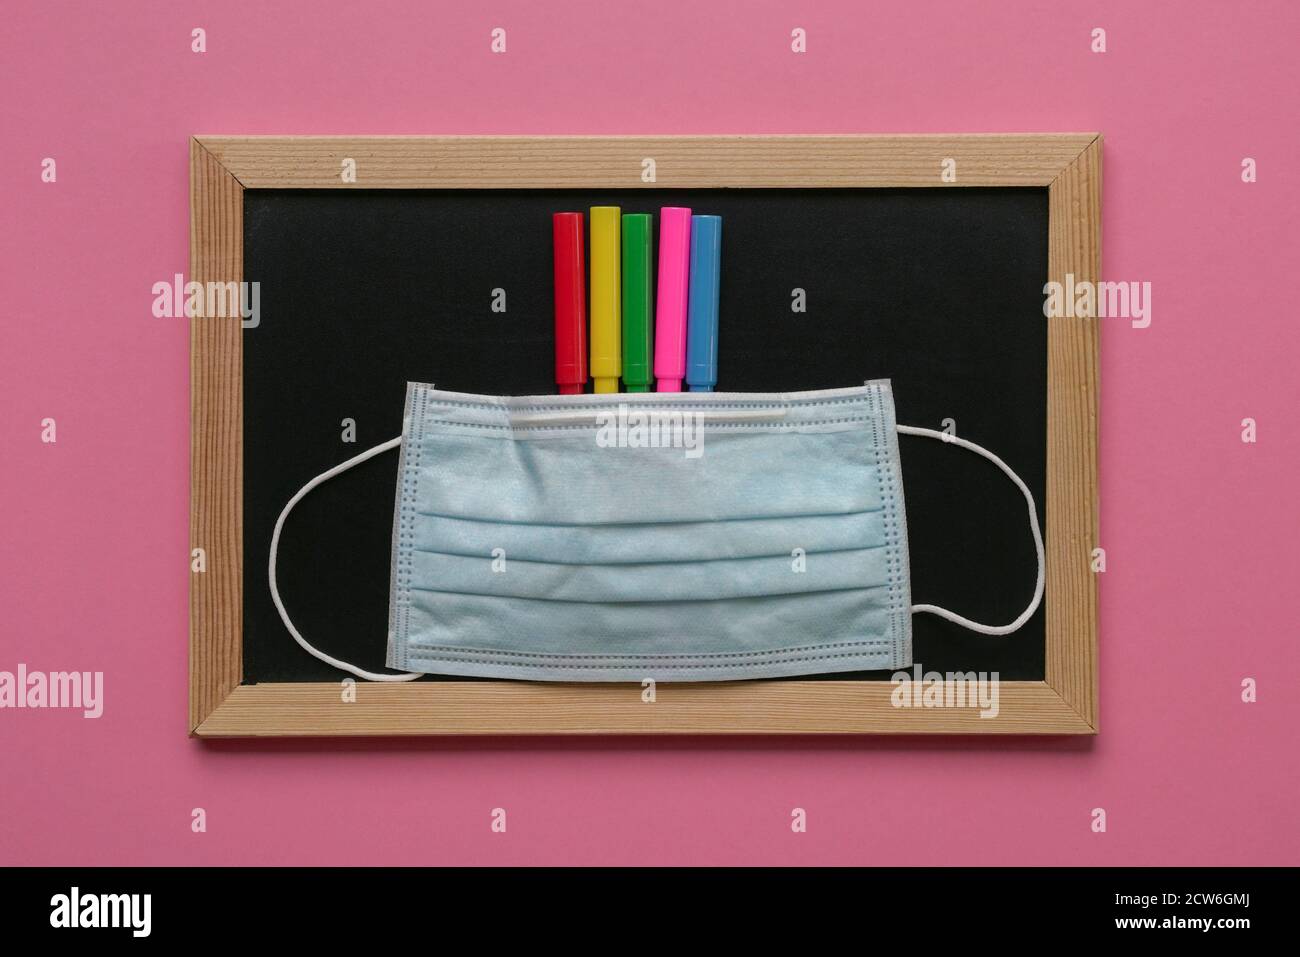 Face mask on top of colored pens and blackboard. Pink background. Stock Photo